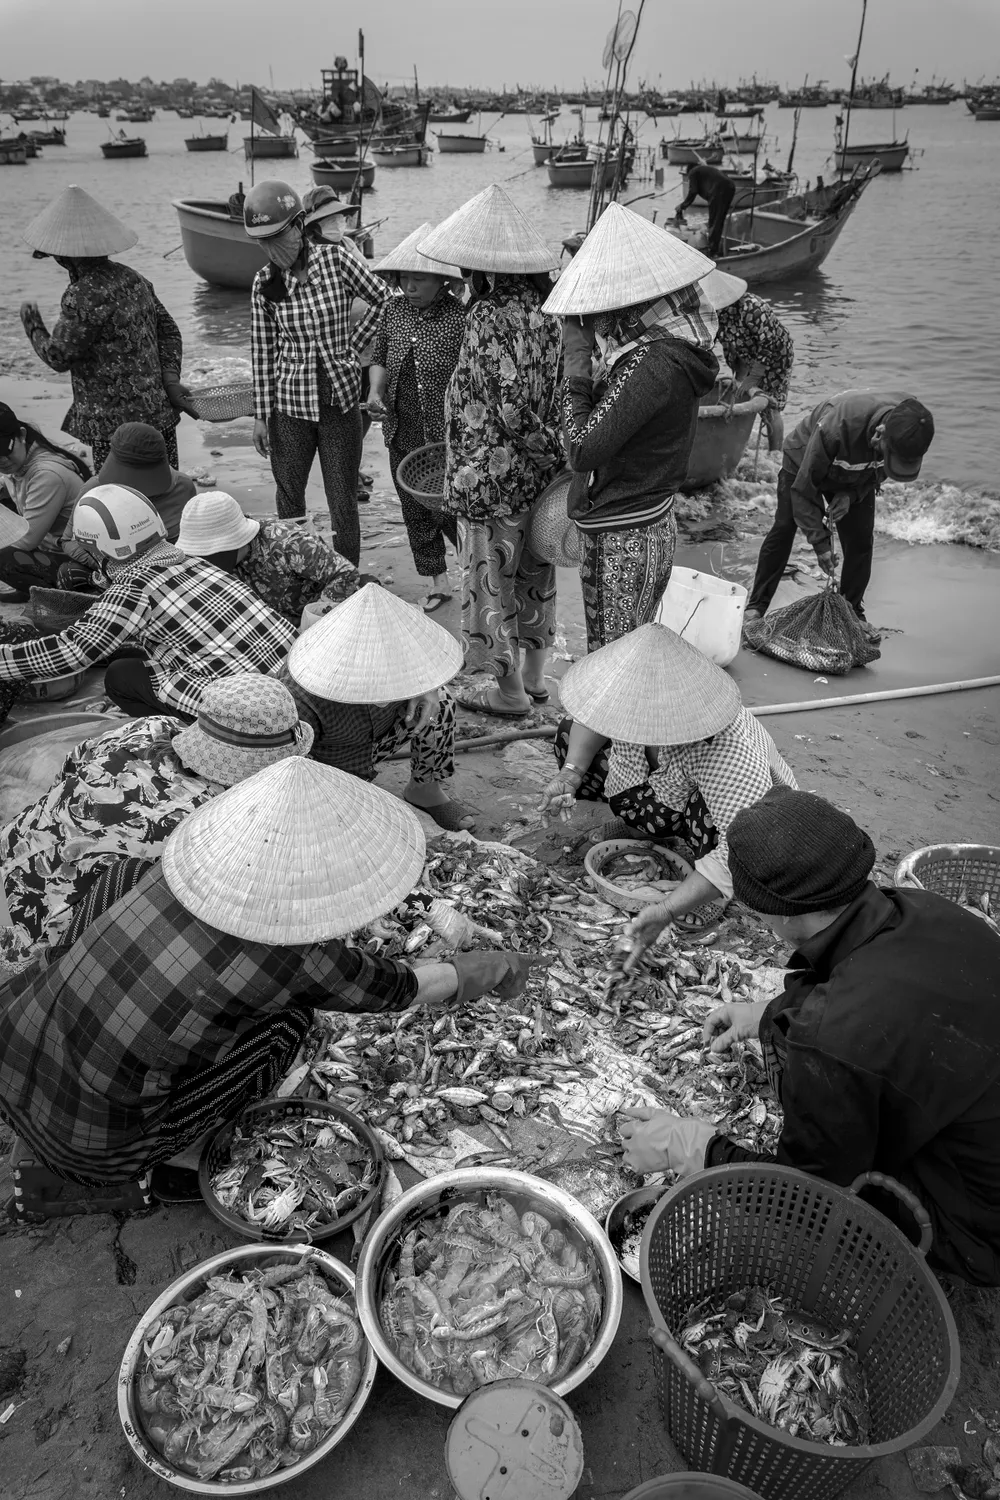 The people and their life style from Mũi Né Fishing village, one of the famous travel spots of Vietnam.